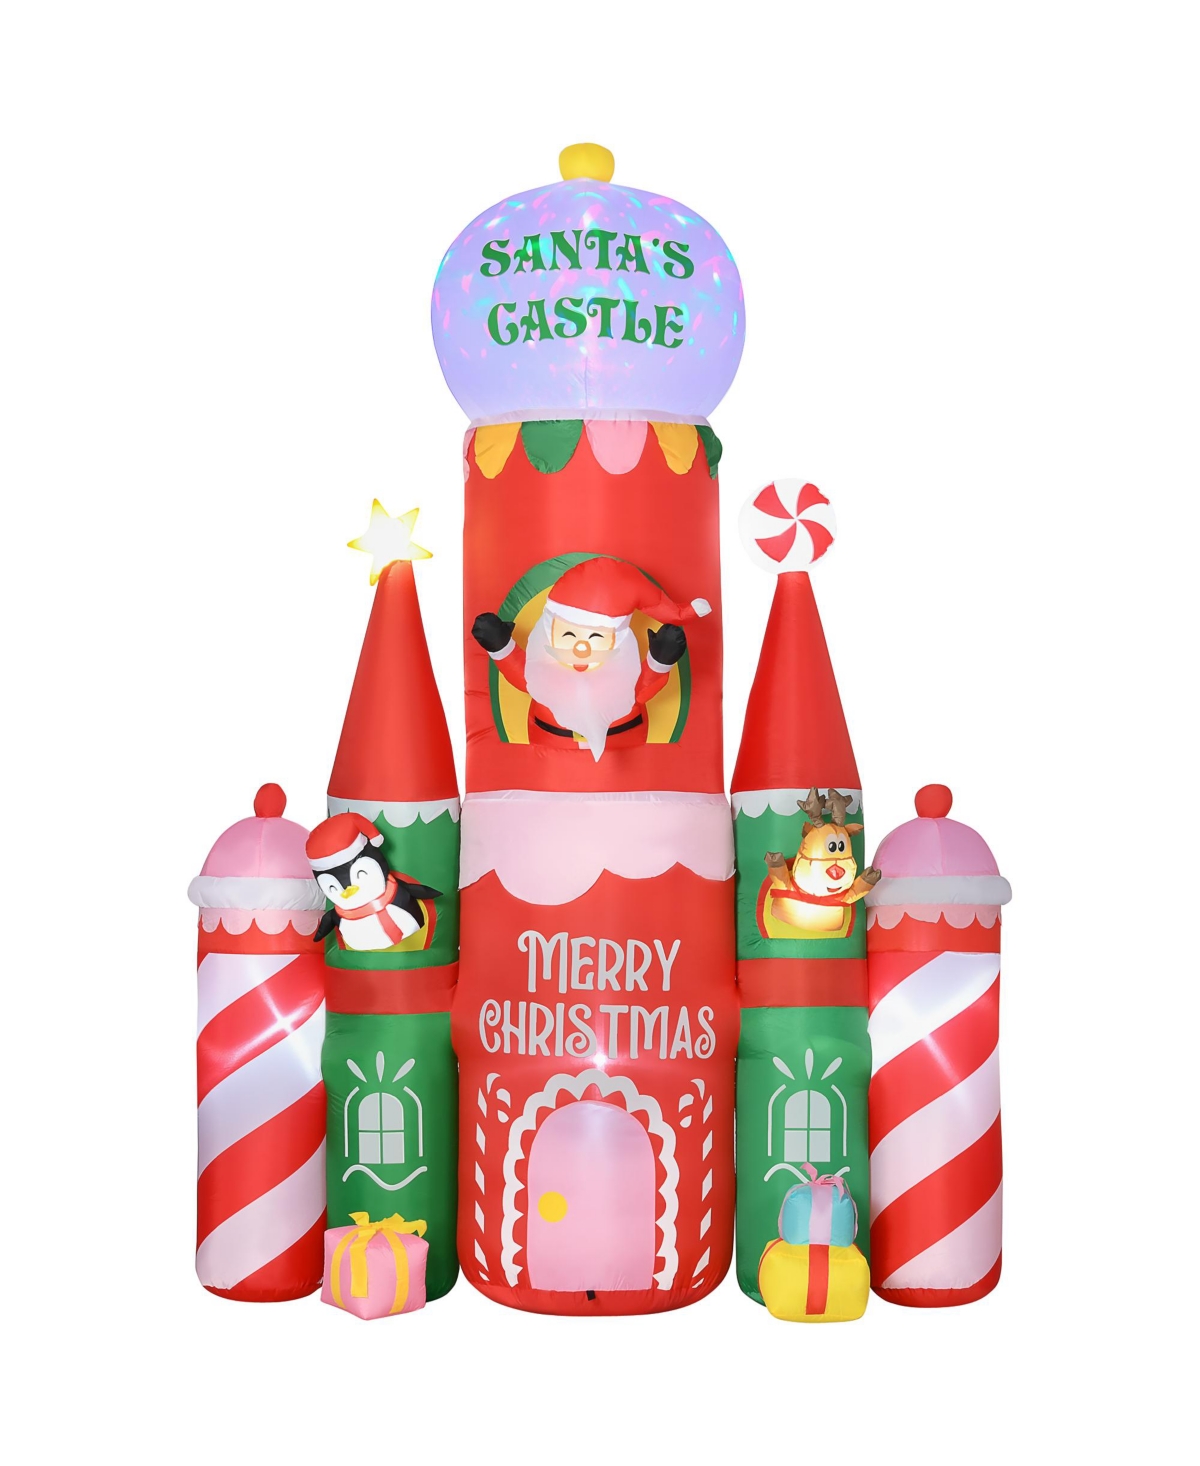 Giant 10ft Christmas Inflatables Decorations Candy Castle Santa Claus w/ Light - Multi-colored